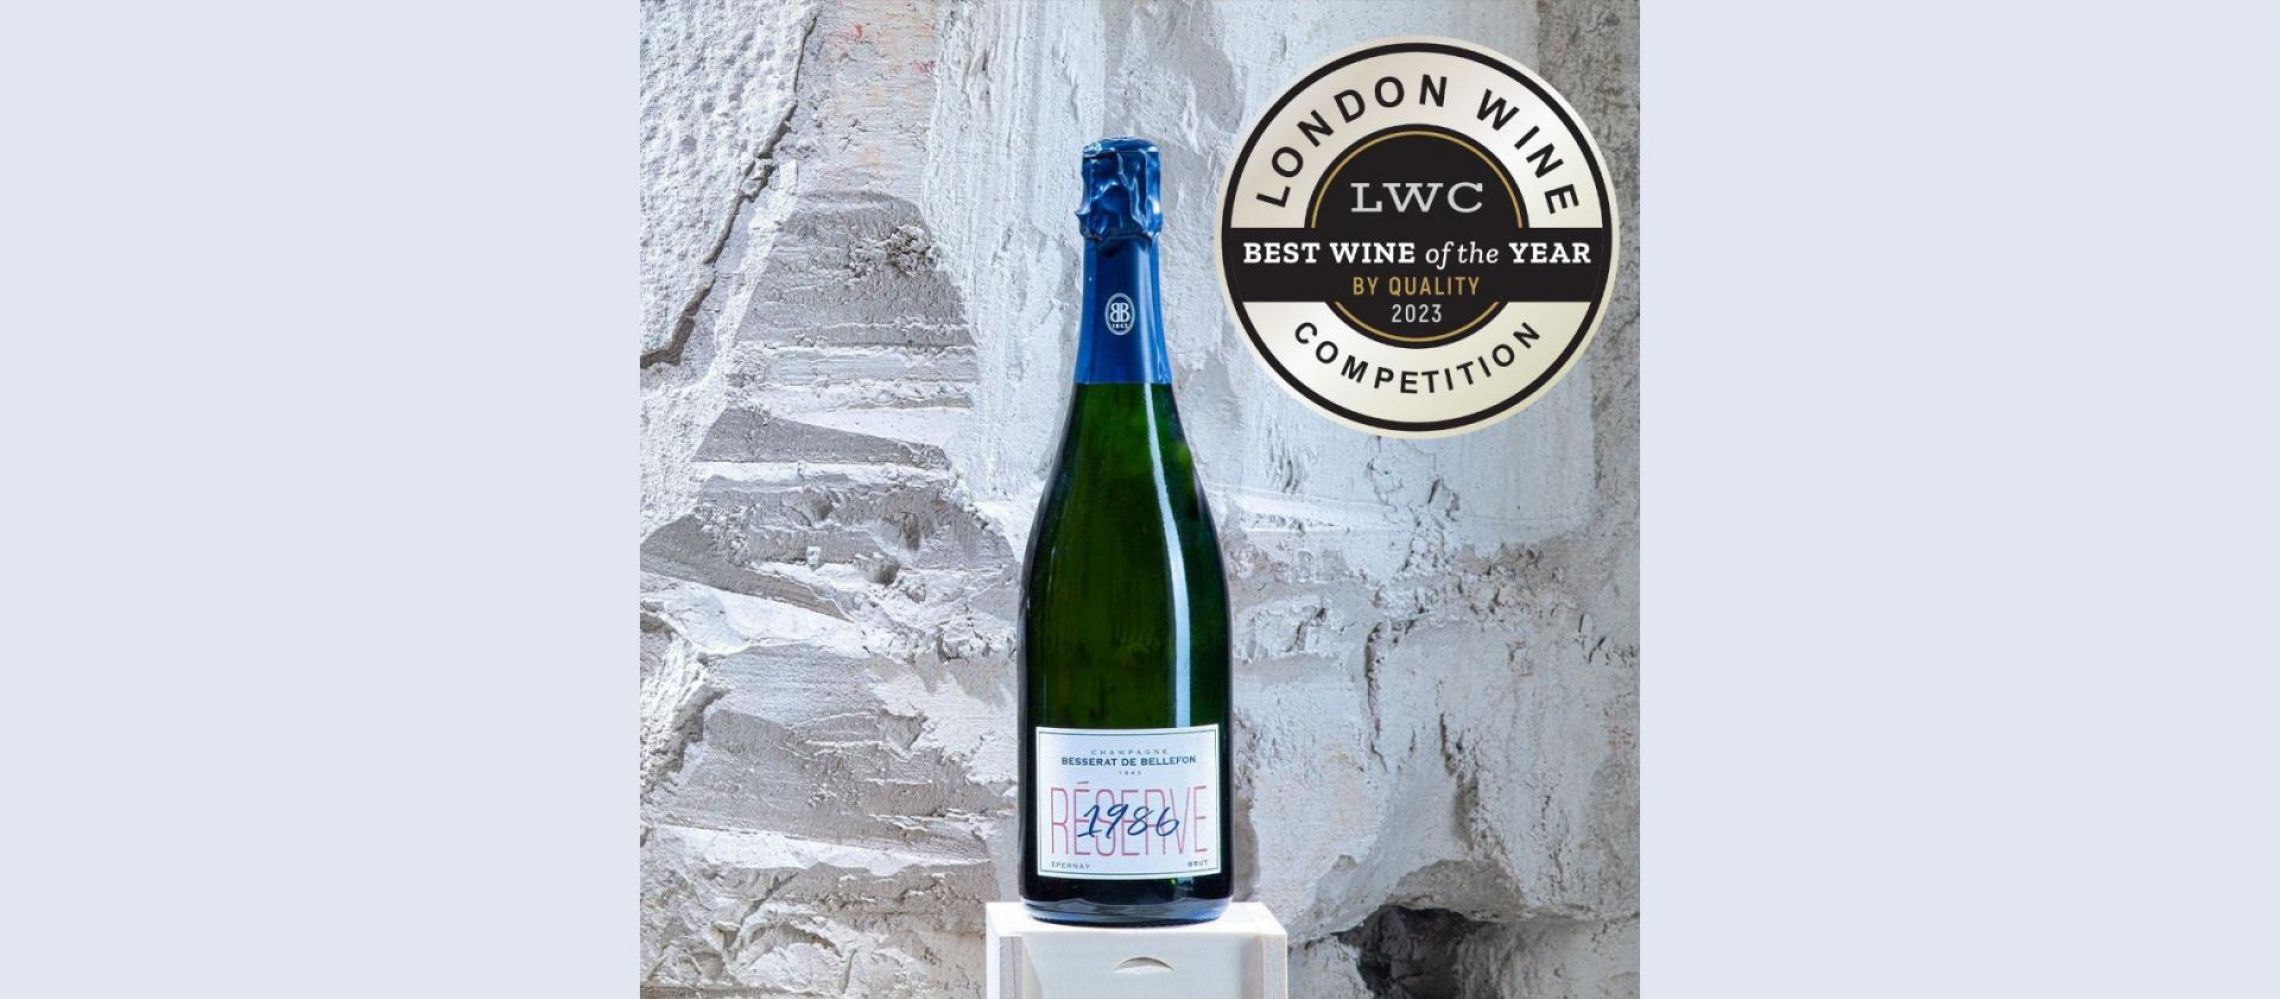 Photo for: Champagne Takes The Best Wine By Quality At 2023 London Wine Competition.